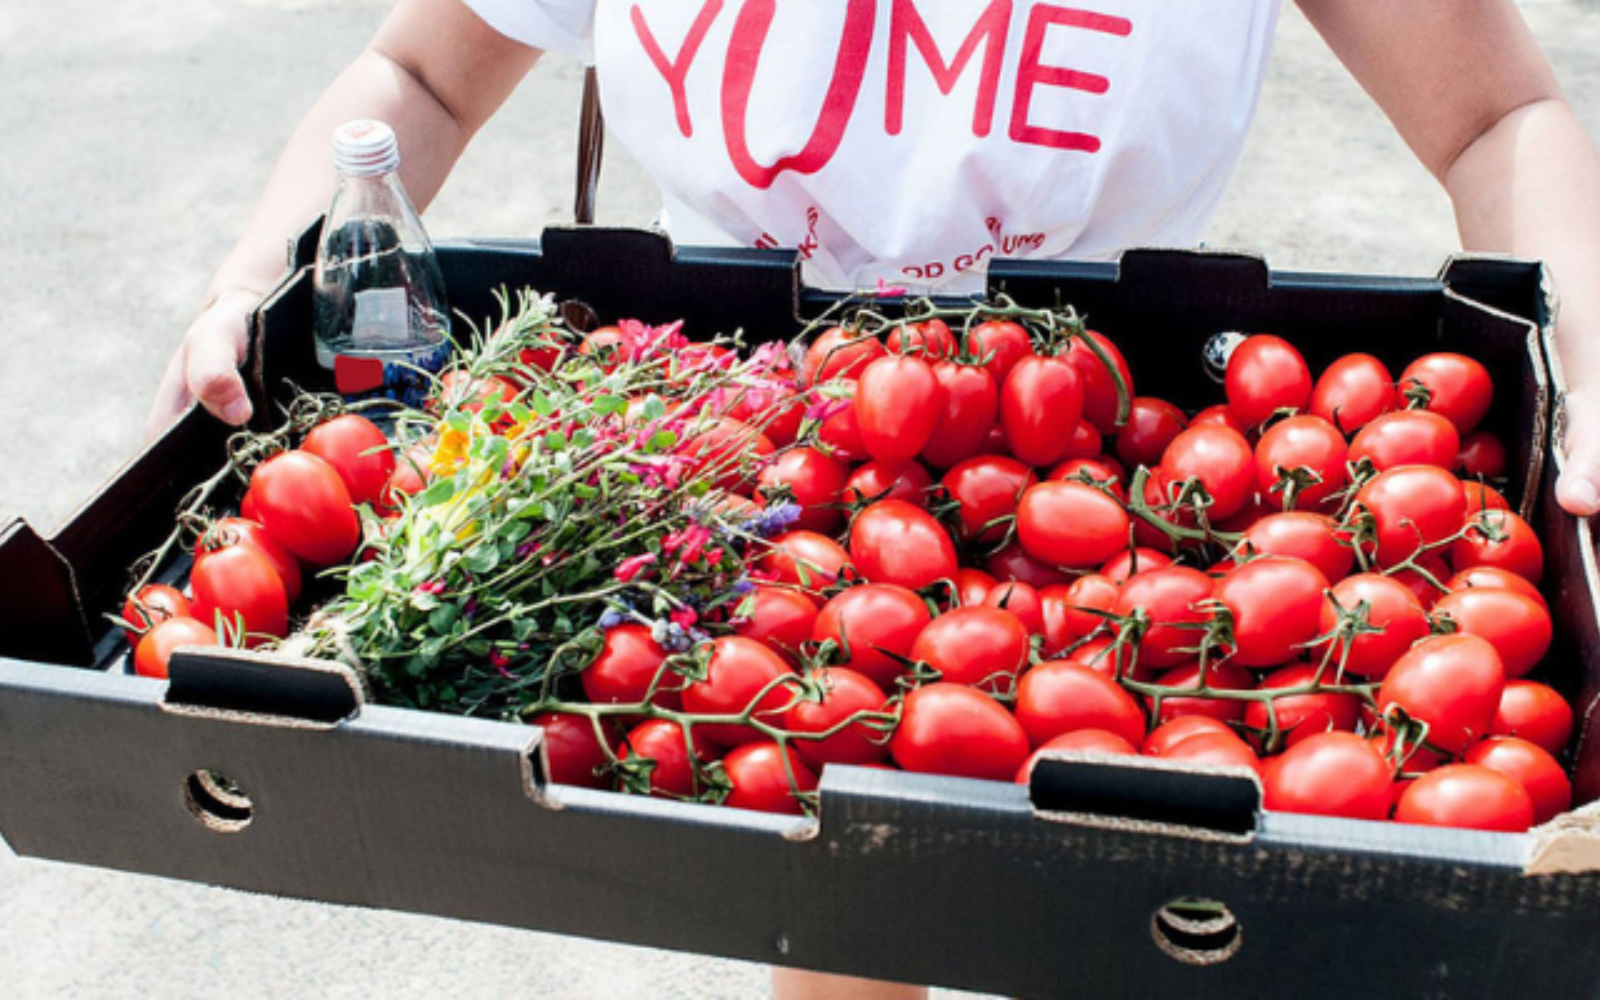 Yume's Fight Against Food Waste Gains Momentum with Fresh Funding Boost